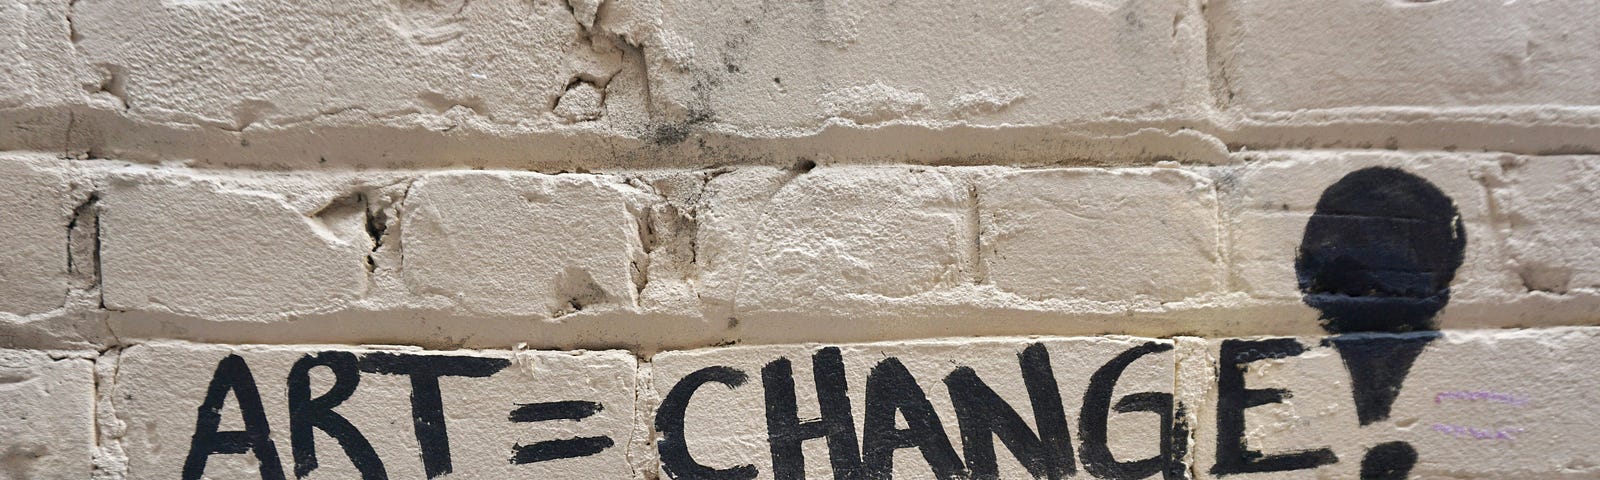 Writing on white wall, that says: Art equals change.